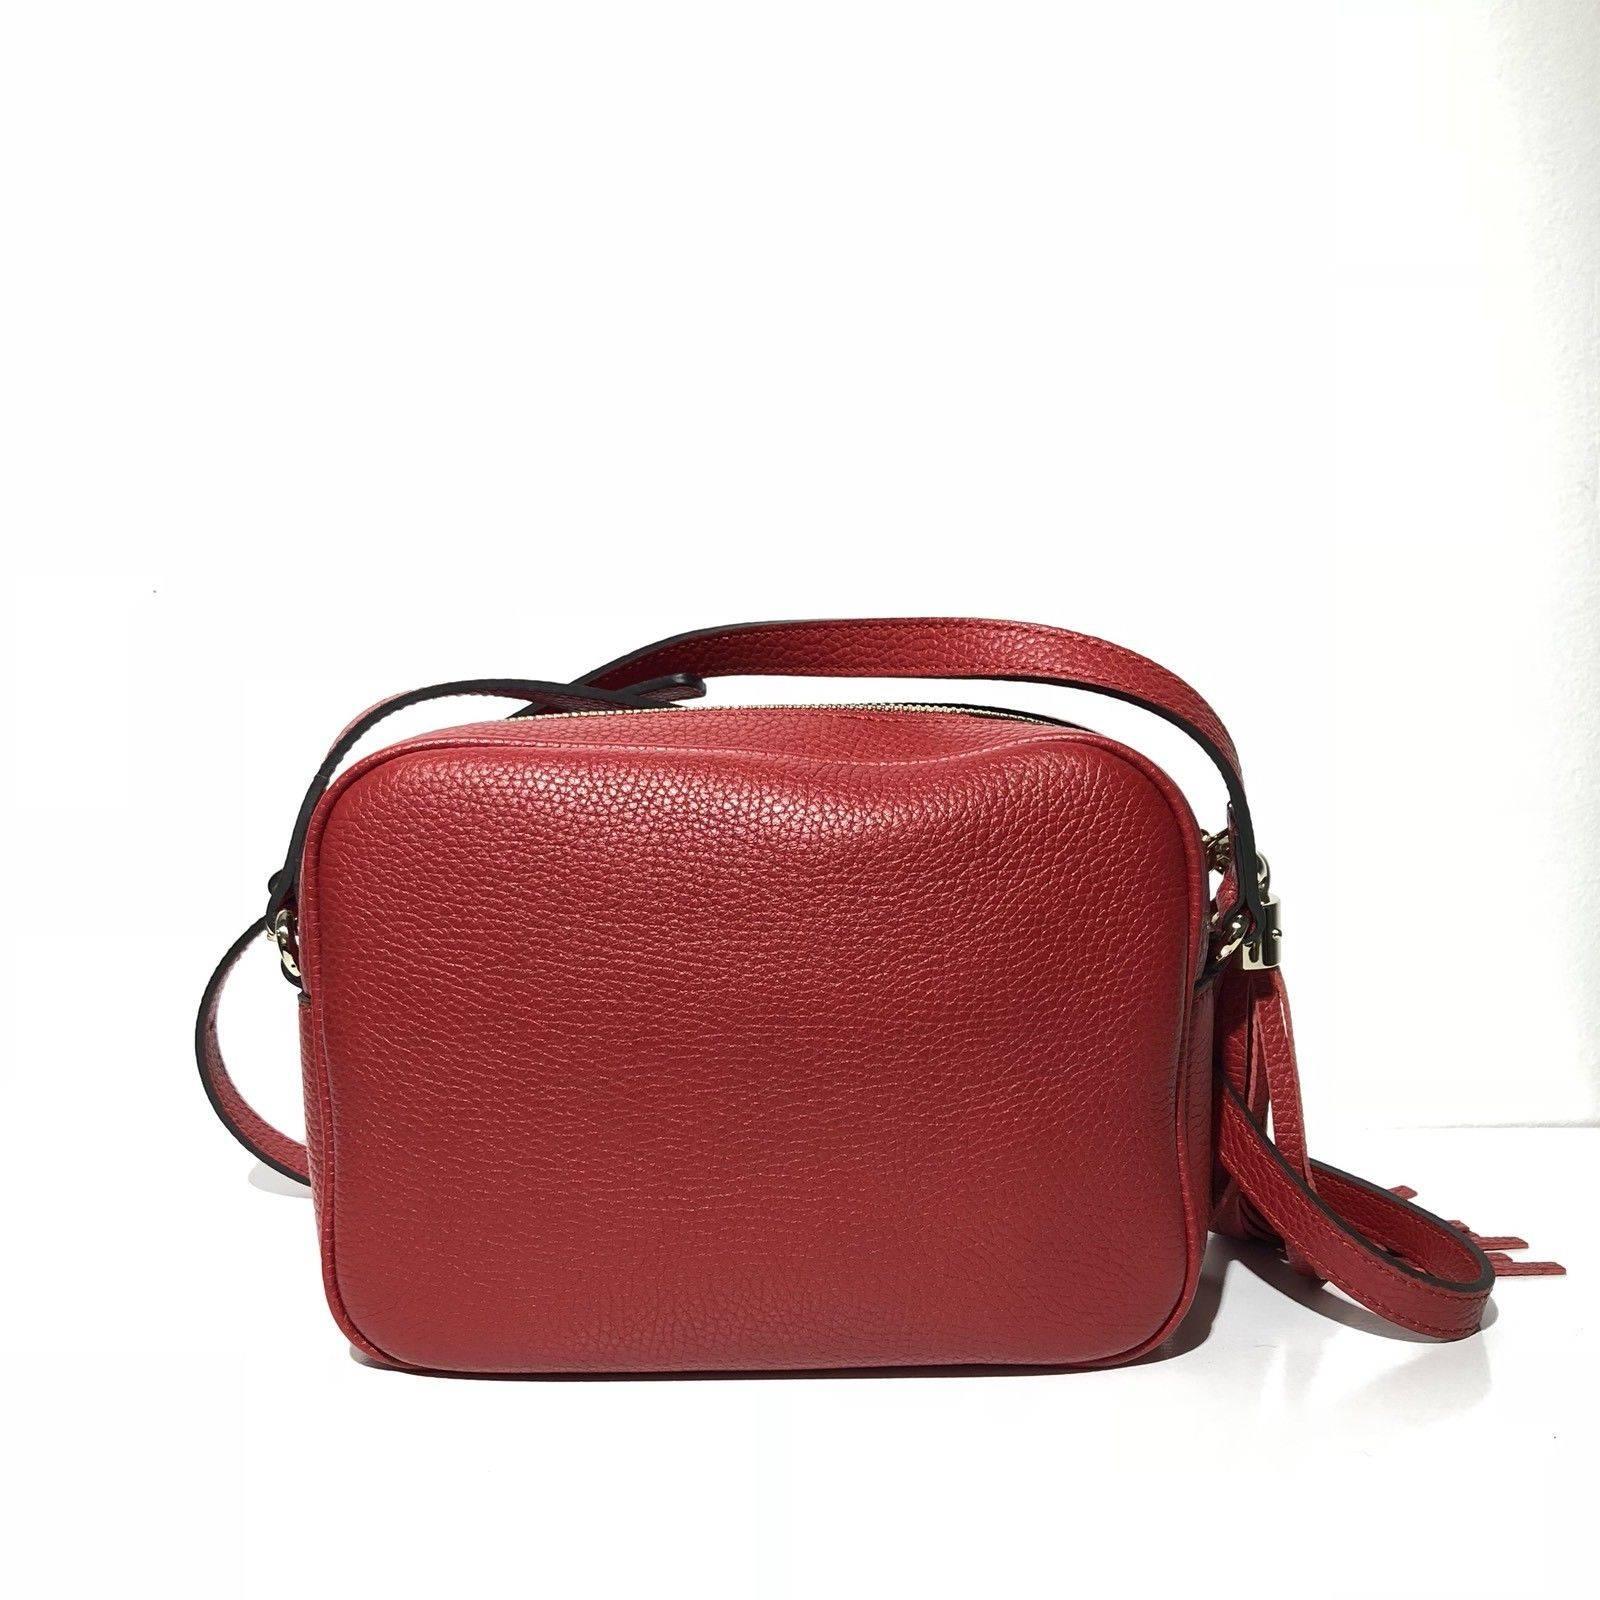 Gucci Soho Disco Leather Shoulder Crossbody Bag RED NEW
Brand new with cards and dustbag.
Made in Italy.
6 H X 2.5 D X 8 L